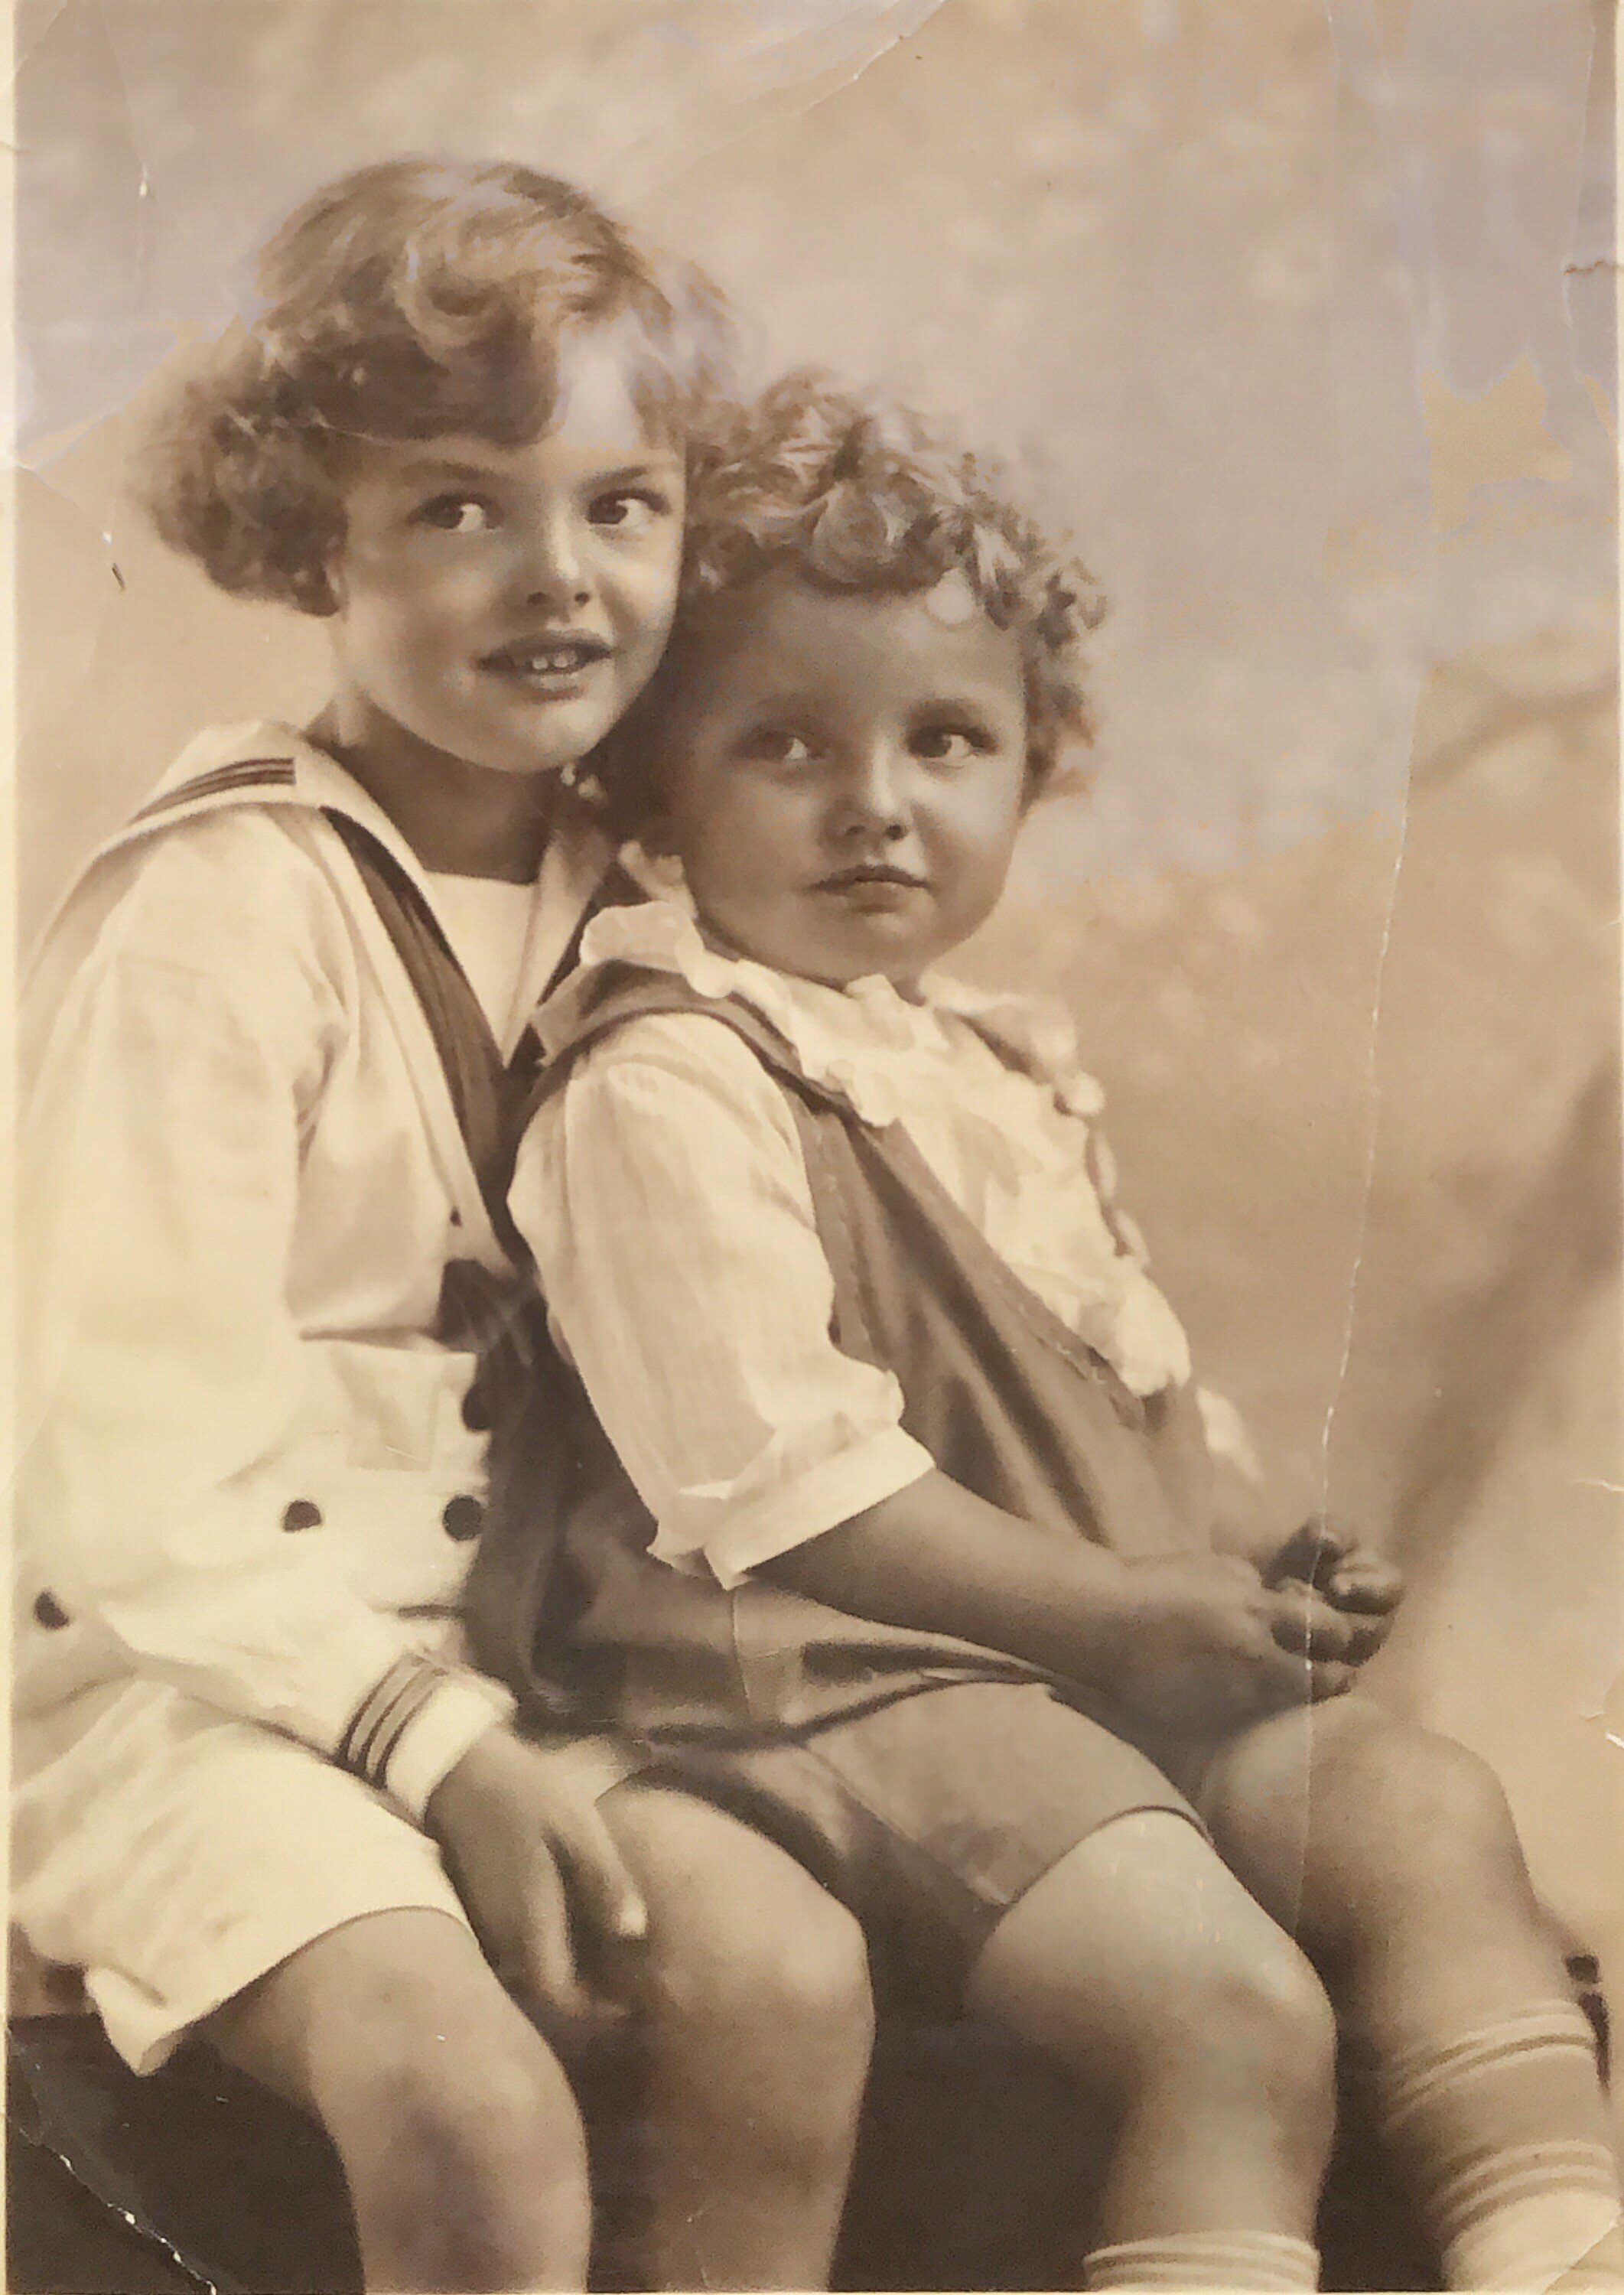  Sandy and his brother, David. c 1925-1928 